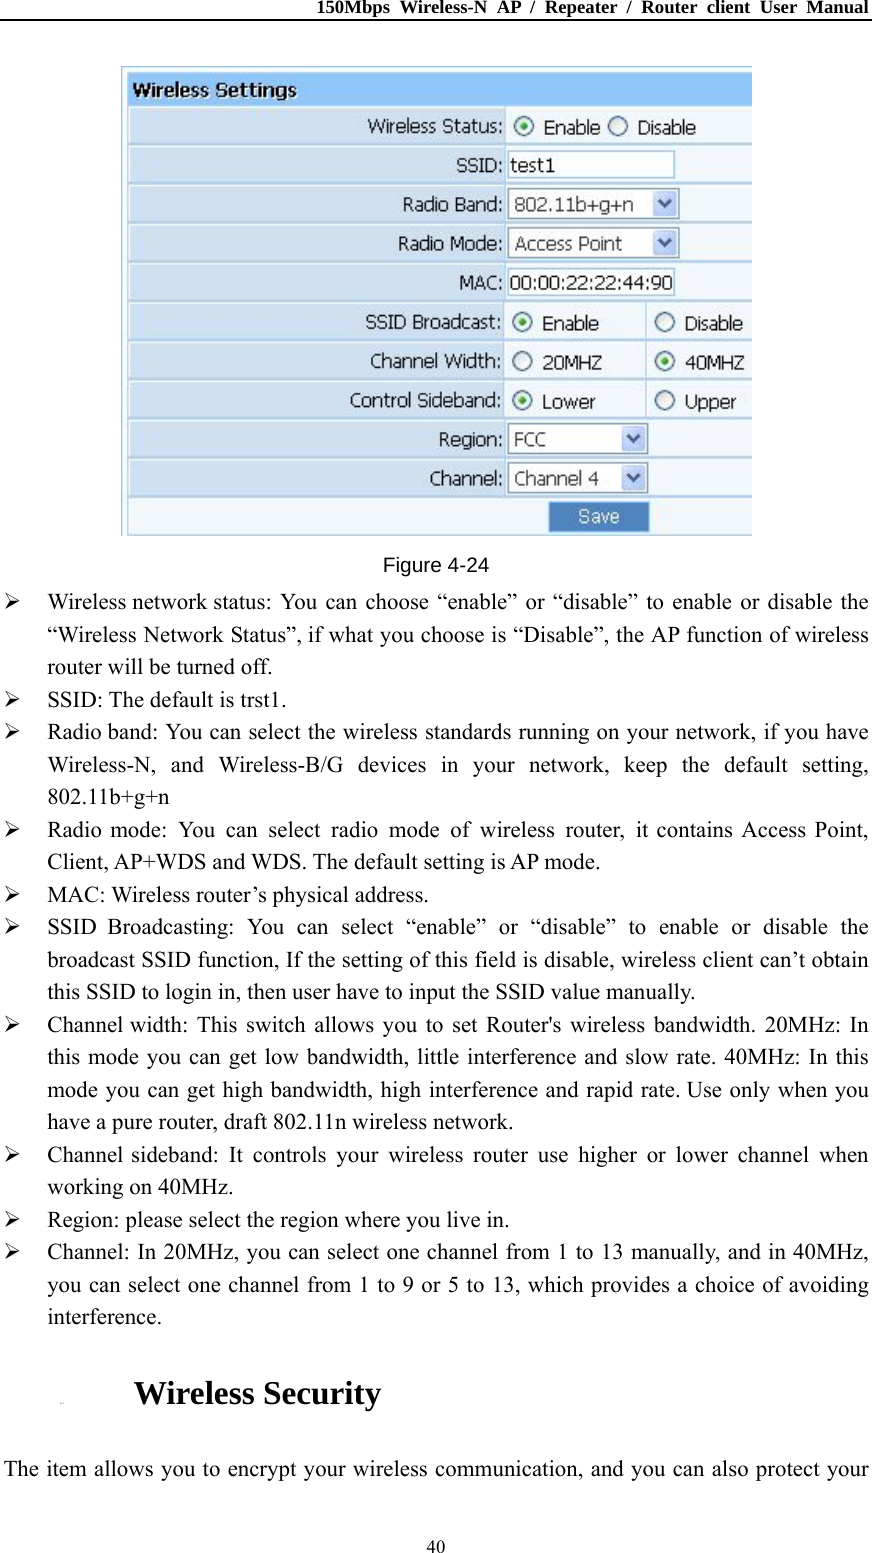 150Mbps Wireless-N AP / Repeater / Router client User Manual  40 Figure 4-24  Wireless network status: You can choose “enable” or “disable” to enable or disable the “Wireless Network Status”, if what you choose is “Disable”, the AP function of wireless router will be turned off.  SSID: The default is trst1.  Radio band: You can select the wireless standards running on your network, if you have Wireless-N, and Wireless-B/G devices in your network, keep the default setting, 802.11b+g+n  Radio mode: You can select radio mode of wireless router, it contains Access Point, Client, AP+WDS and WDS. The default setting is AP mode.  MAC: Wireless router’s physical address.  SSID Broadcasting: You can select “enable” or “disable” to enable or disable the broadcast SSID function, If the setting of this field is disable, wireless client can’t obtain this SSID to login in, then user have to input the SSID value manually.  Channel width: This switch allows you to set Router&apos;s wireless bandwidth. 20MHz: In this mode you can get low bandwidth, little interference and slow rate. 40MHz: In this mode you can get high bandwidth, high interference and rapid rate. Use only when you have a pure router, draft 802.11n wireless network.  Channel sideband: It controls your wireless router use higher or lower channel when working on 40MHz.  Region: please select the region where you live in.  Channel: In 20MHz, you can select one channel from 1 to 13 manually, and in 40MHz, you can select one channel from 1 to 9 or 5 to 13, which provides a choice of avoiding interference.  4.5.2. Wireless Security The item allows you to encrypt your wireless communication, and you can also protect your 